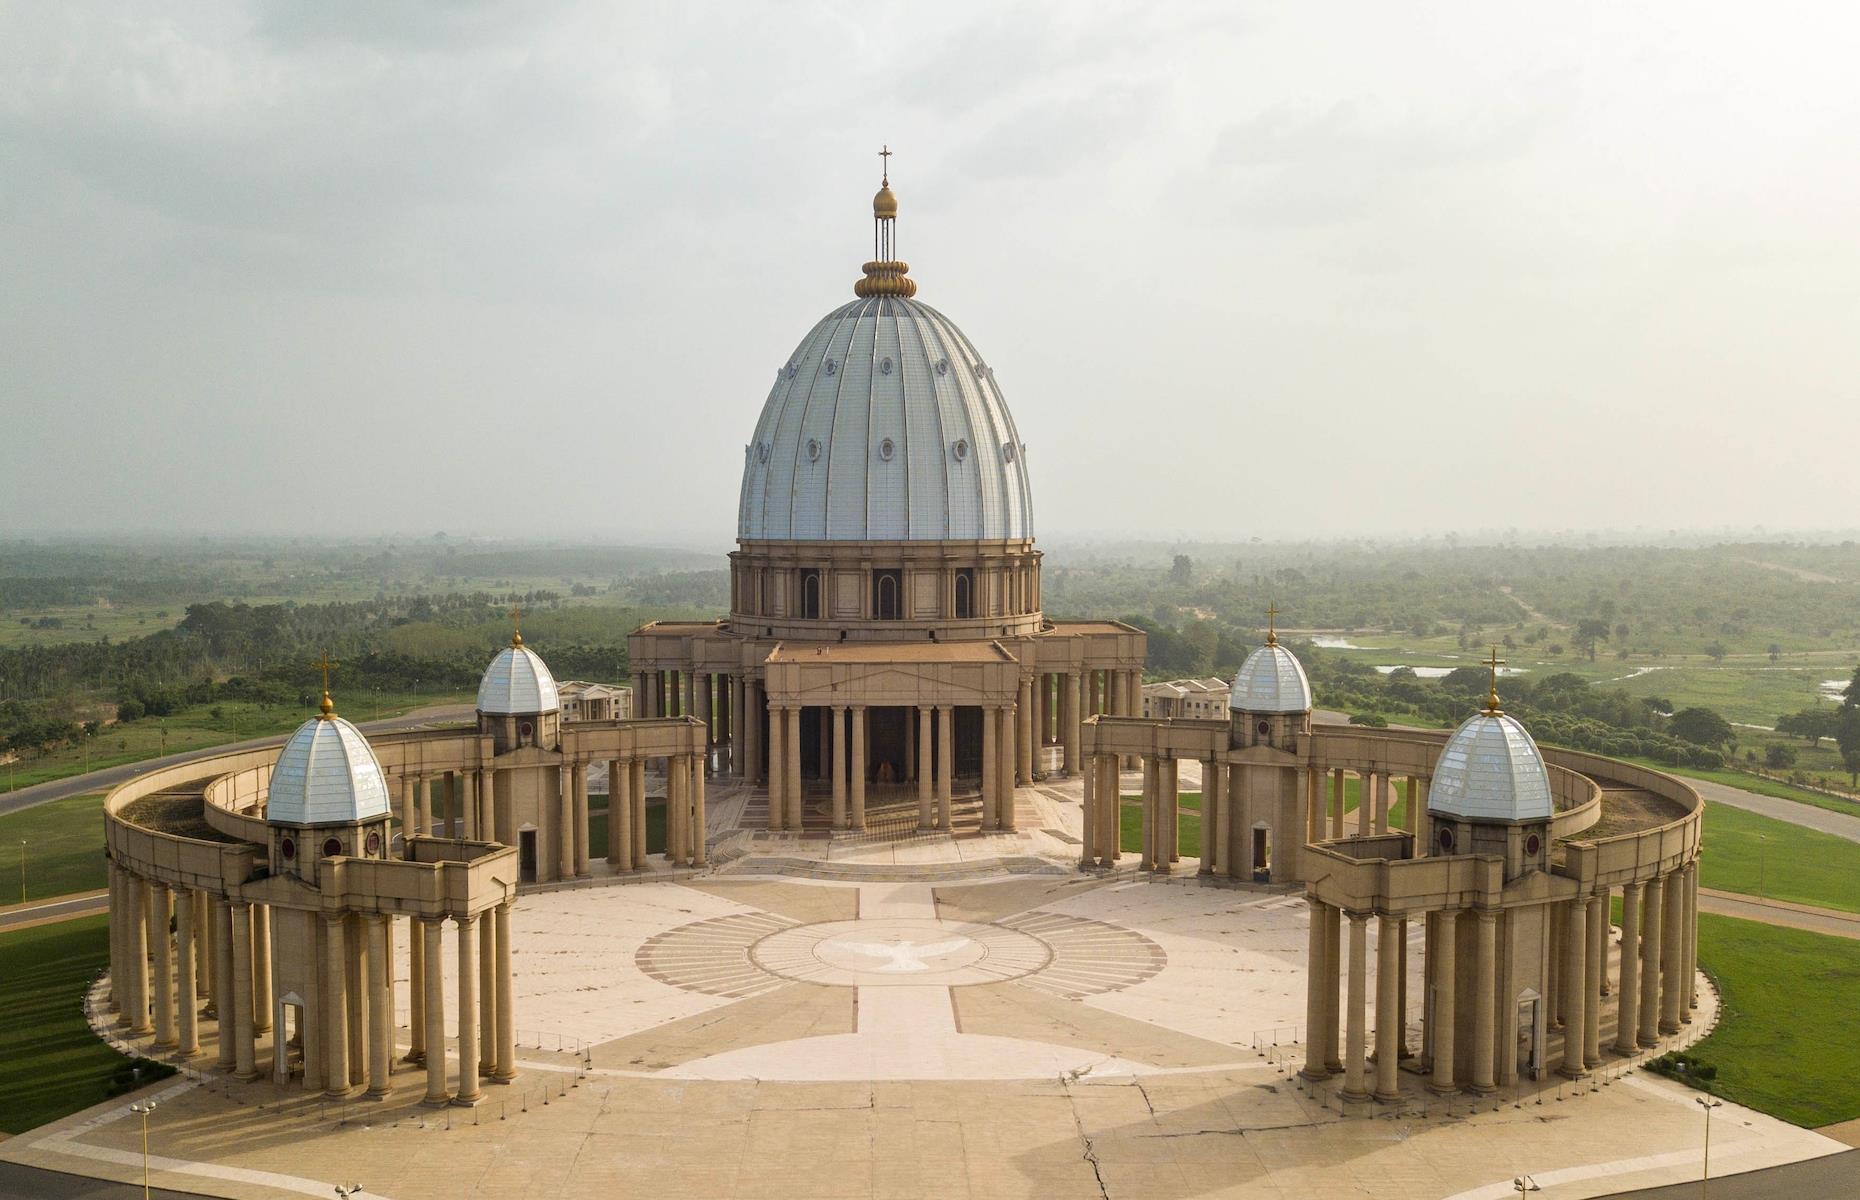 <p>This almighty structure is the Basilica of Our Lady of Peace of Yamoussoukro in the Ivory Coast and it’s the world's largest single church building of any denomination, according to the <em>Guinness Book of Records</em>. Built in the country’s administrative capital Yamoussoukro between 1986–89, the Catholic basilica’s sprawling exterior measures 322,291 square feet (30,000sqm). It has a capacity for 8,000 seated worshippers inside and can contain crowds of hundreds of thousands on its outside grounds. It was the passion project of then President Felix Houphouet-Boigny and was modeled on the Vatican City’s St Peters.</p>